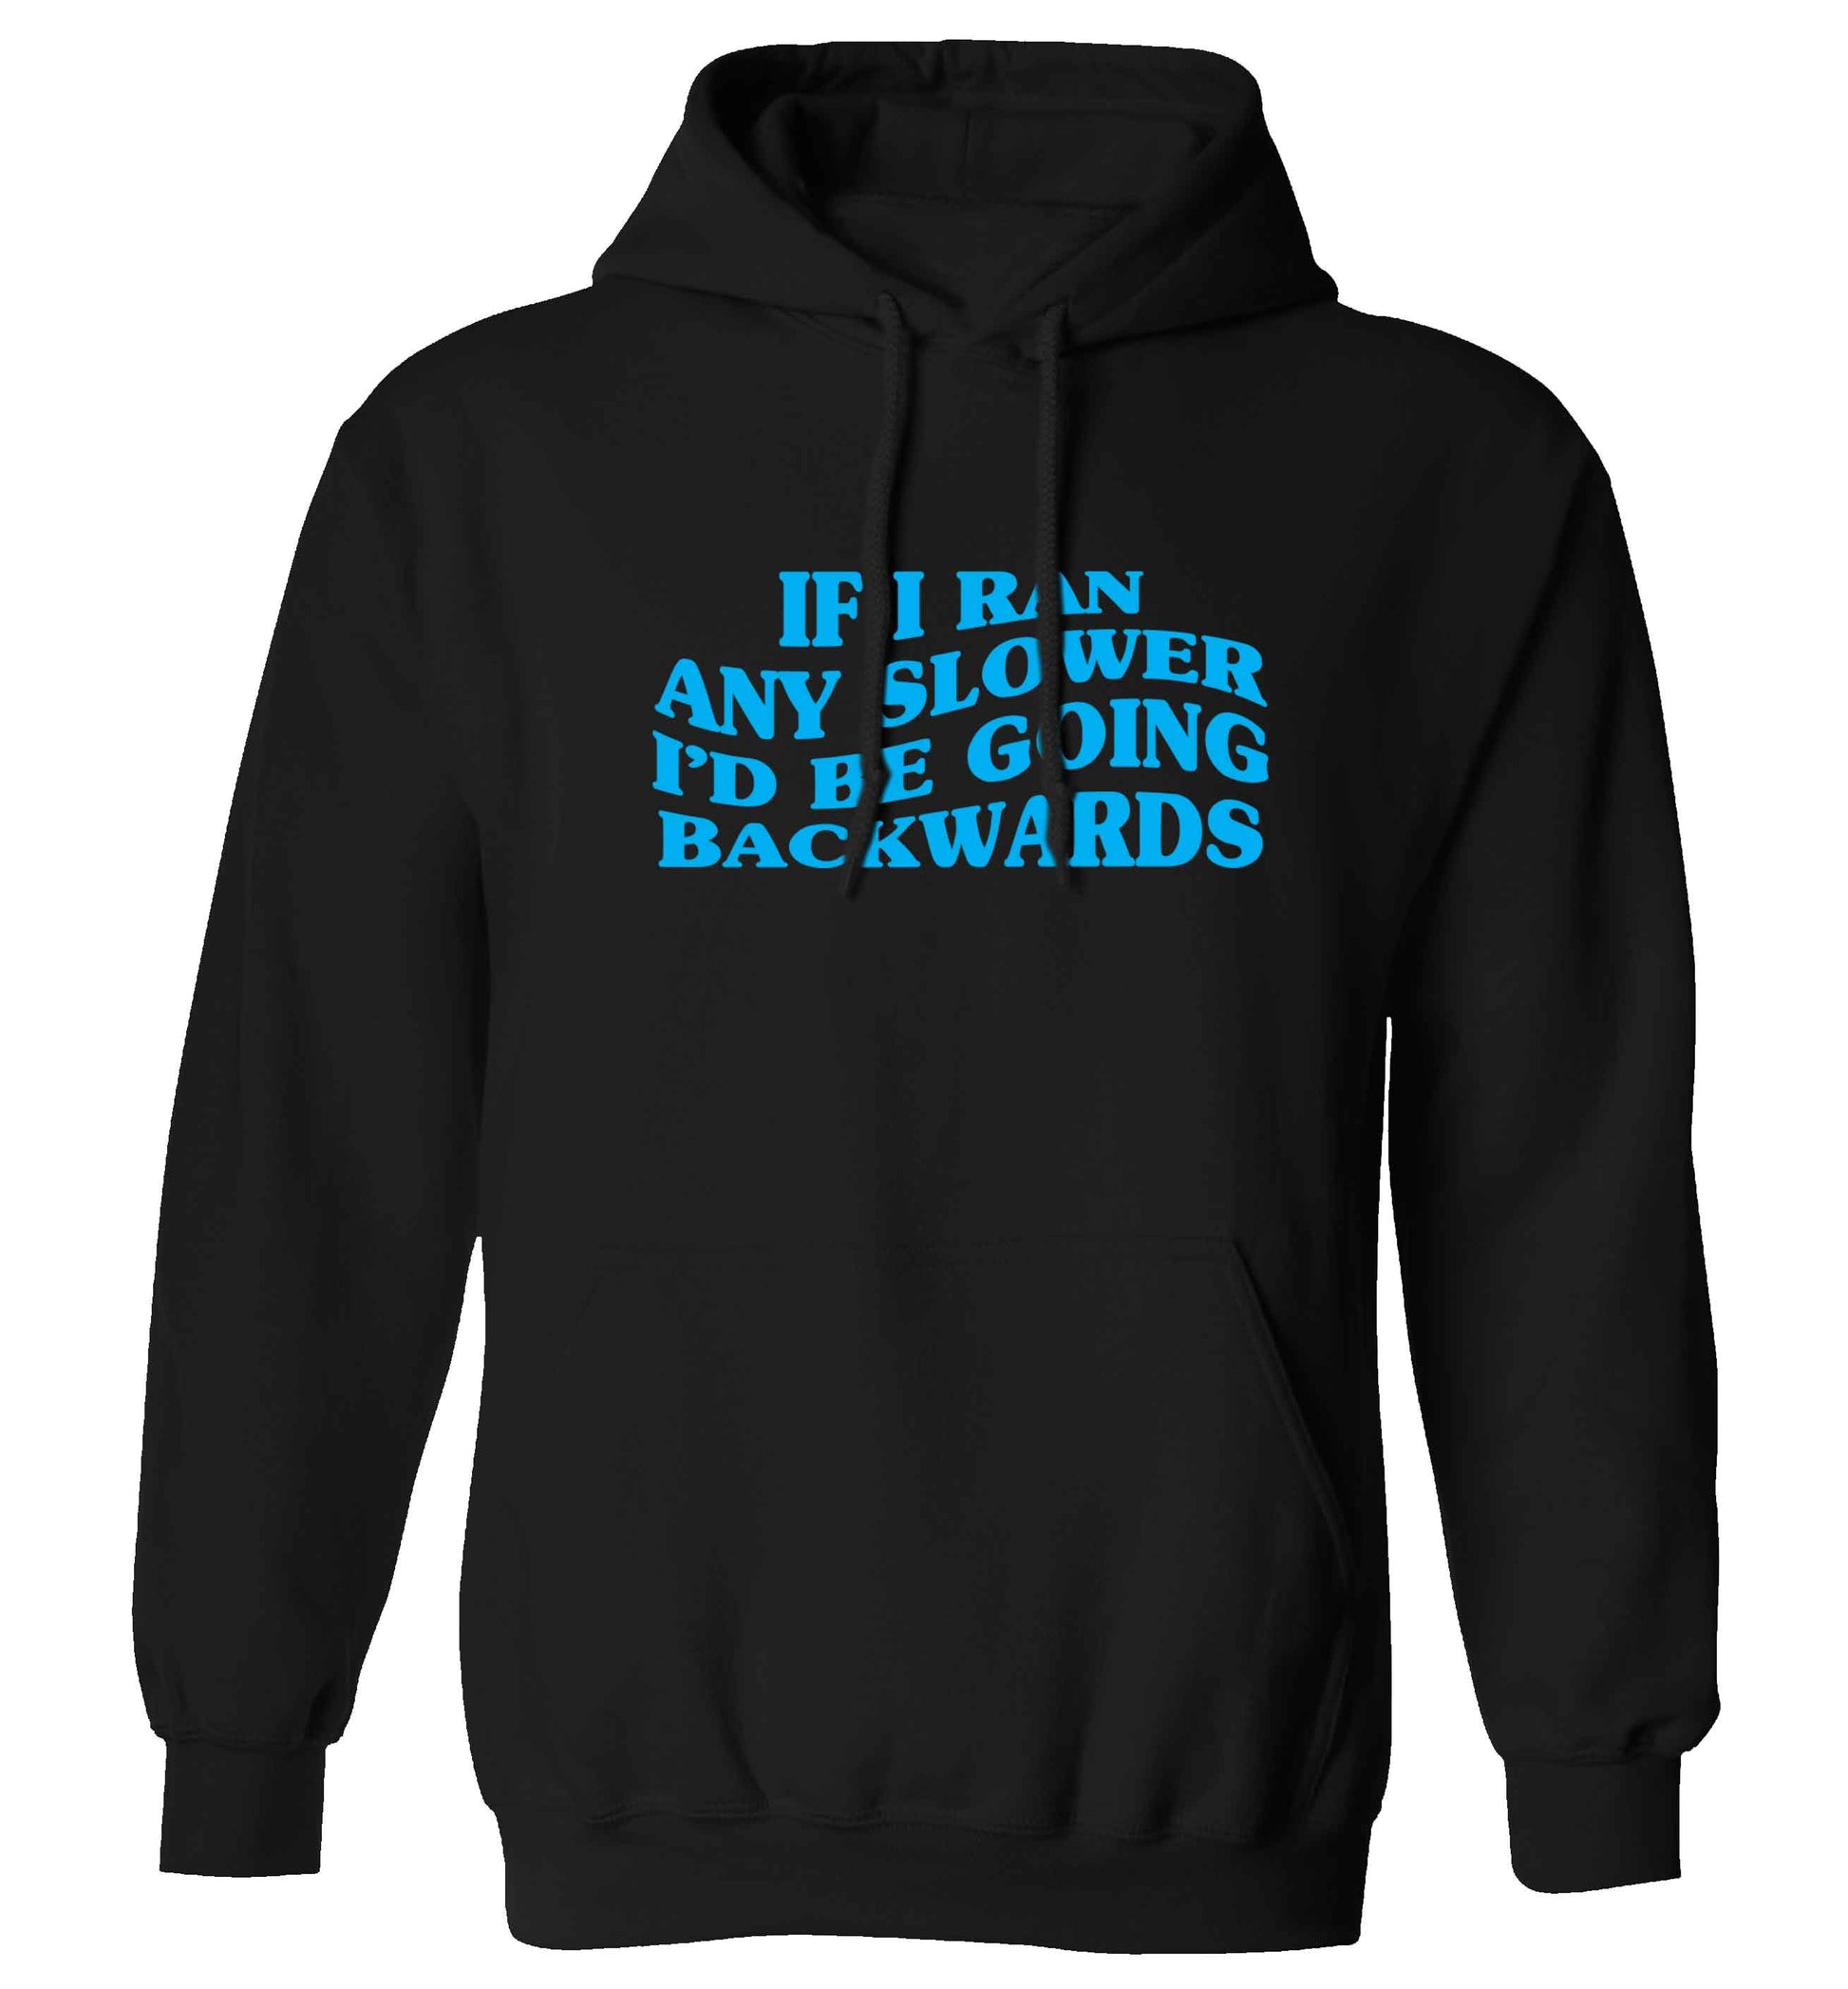 If I ran any slower I'd be going backwards adults unisex black hoodie 2XL